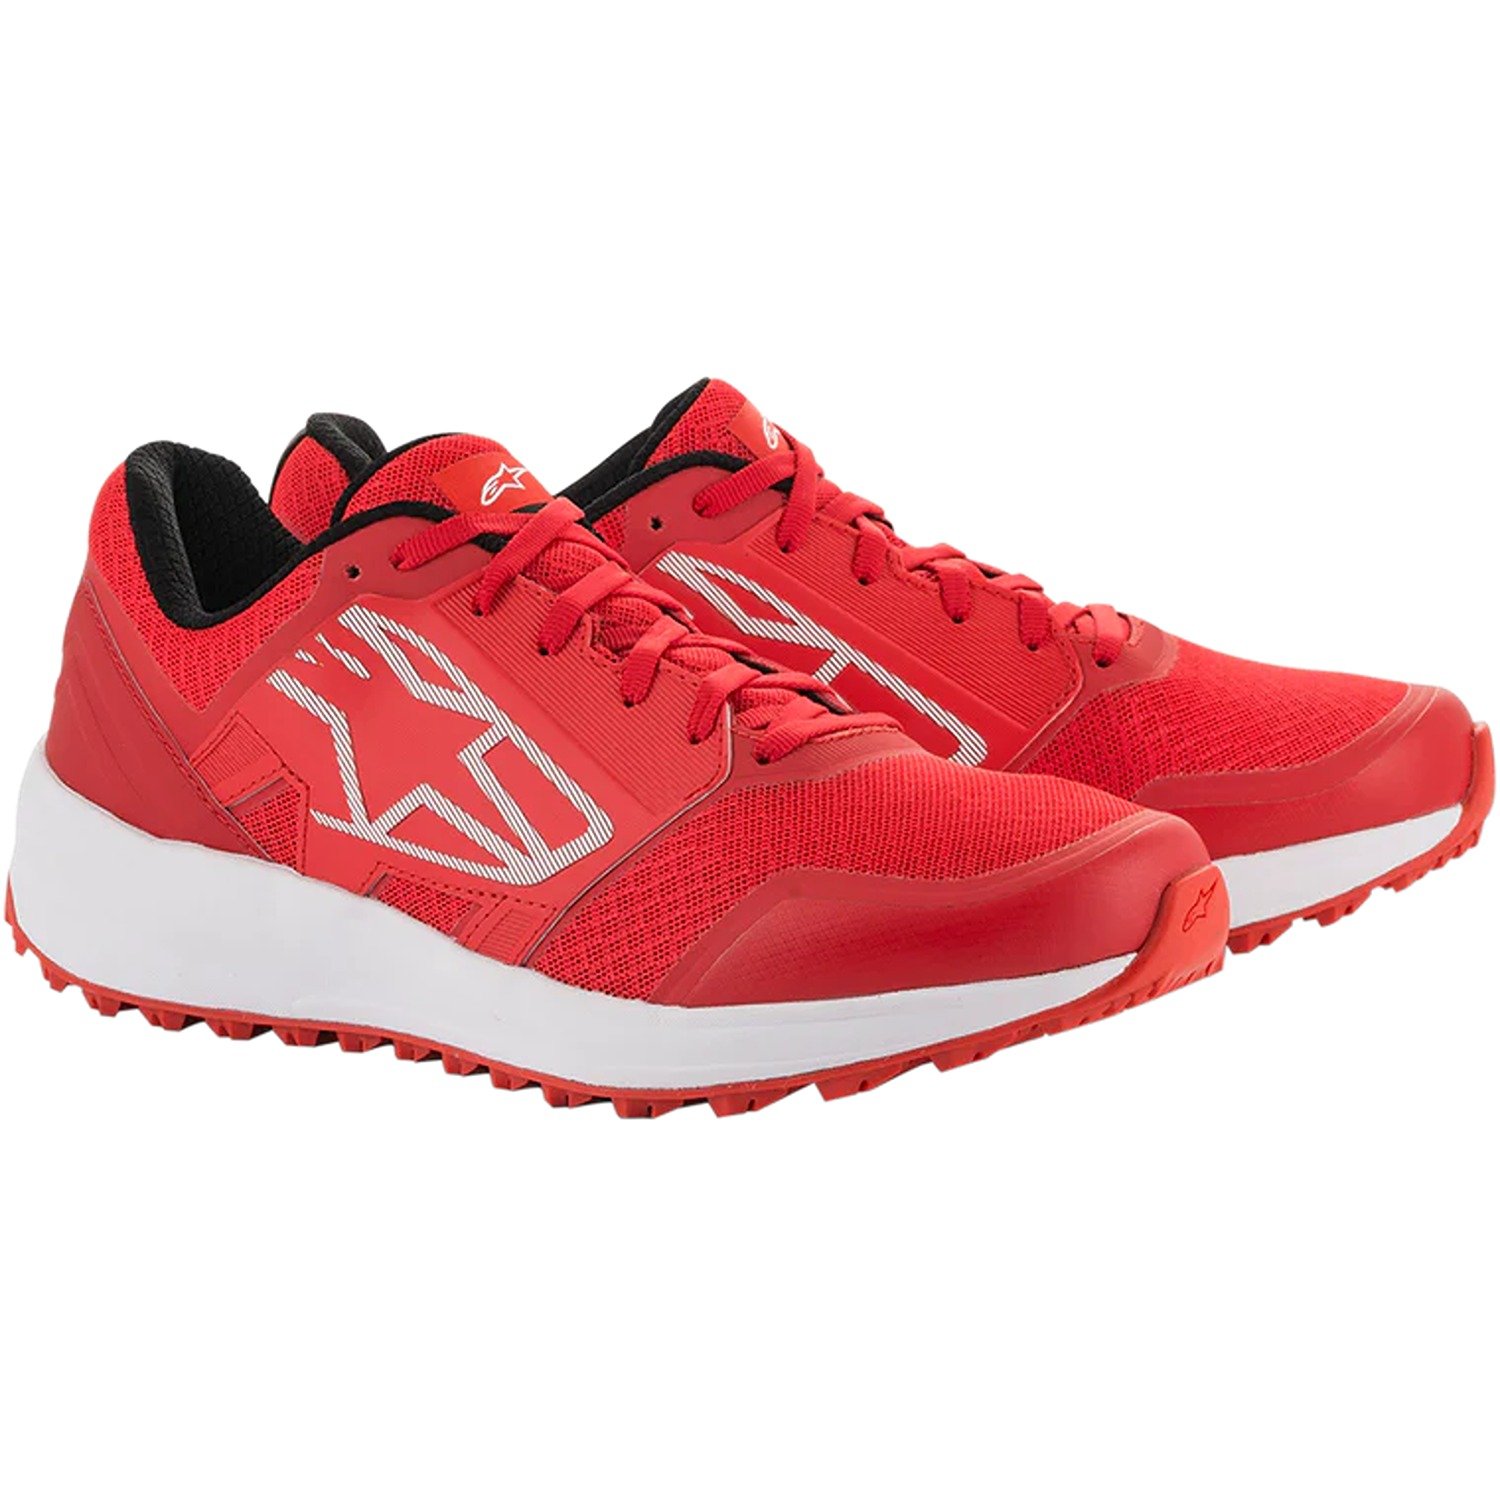 Image of Alpinestars Meta Trail Shoes Red White Taille US 11